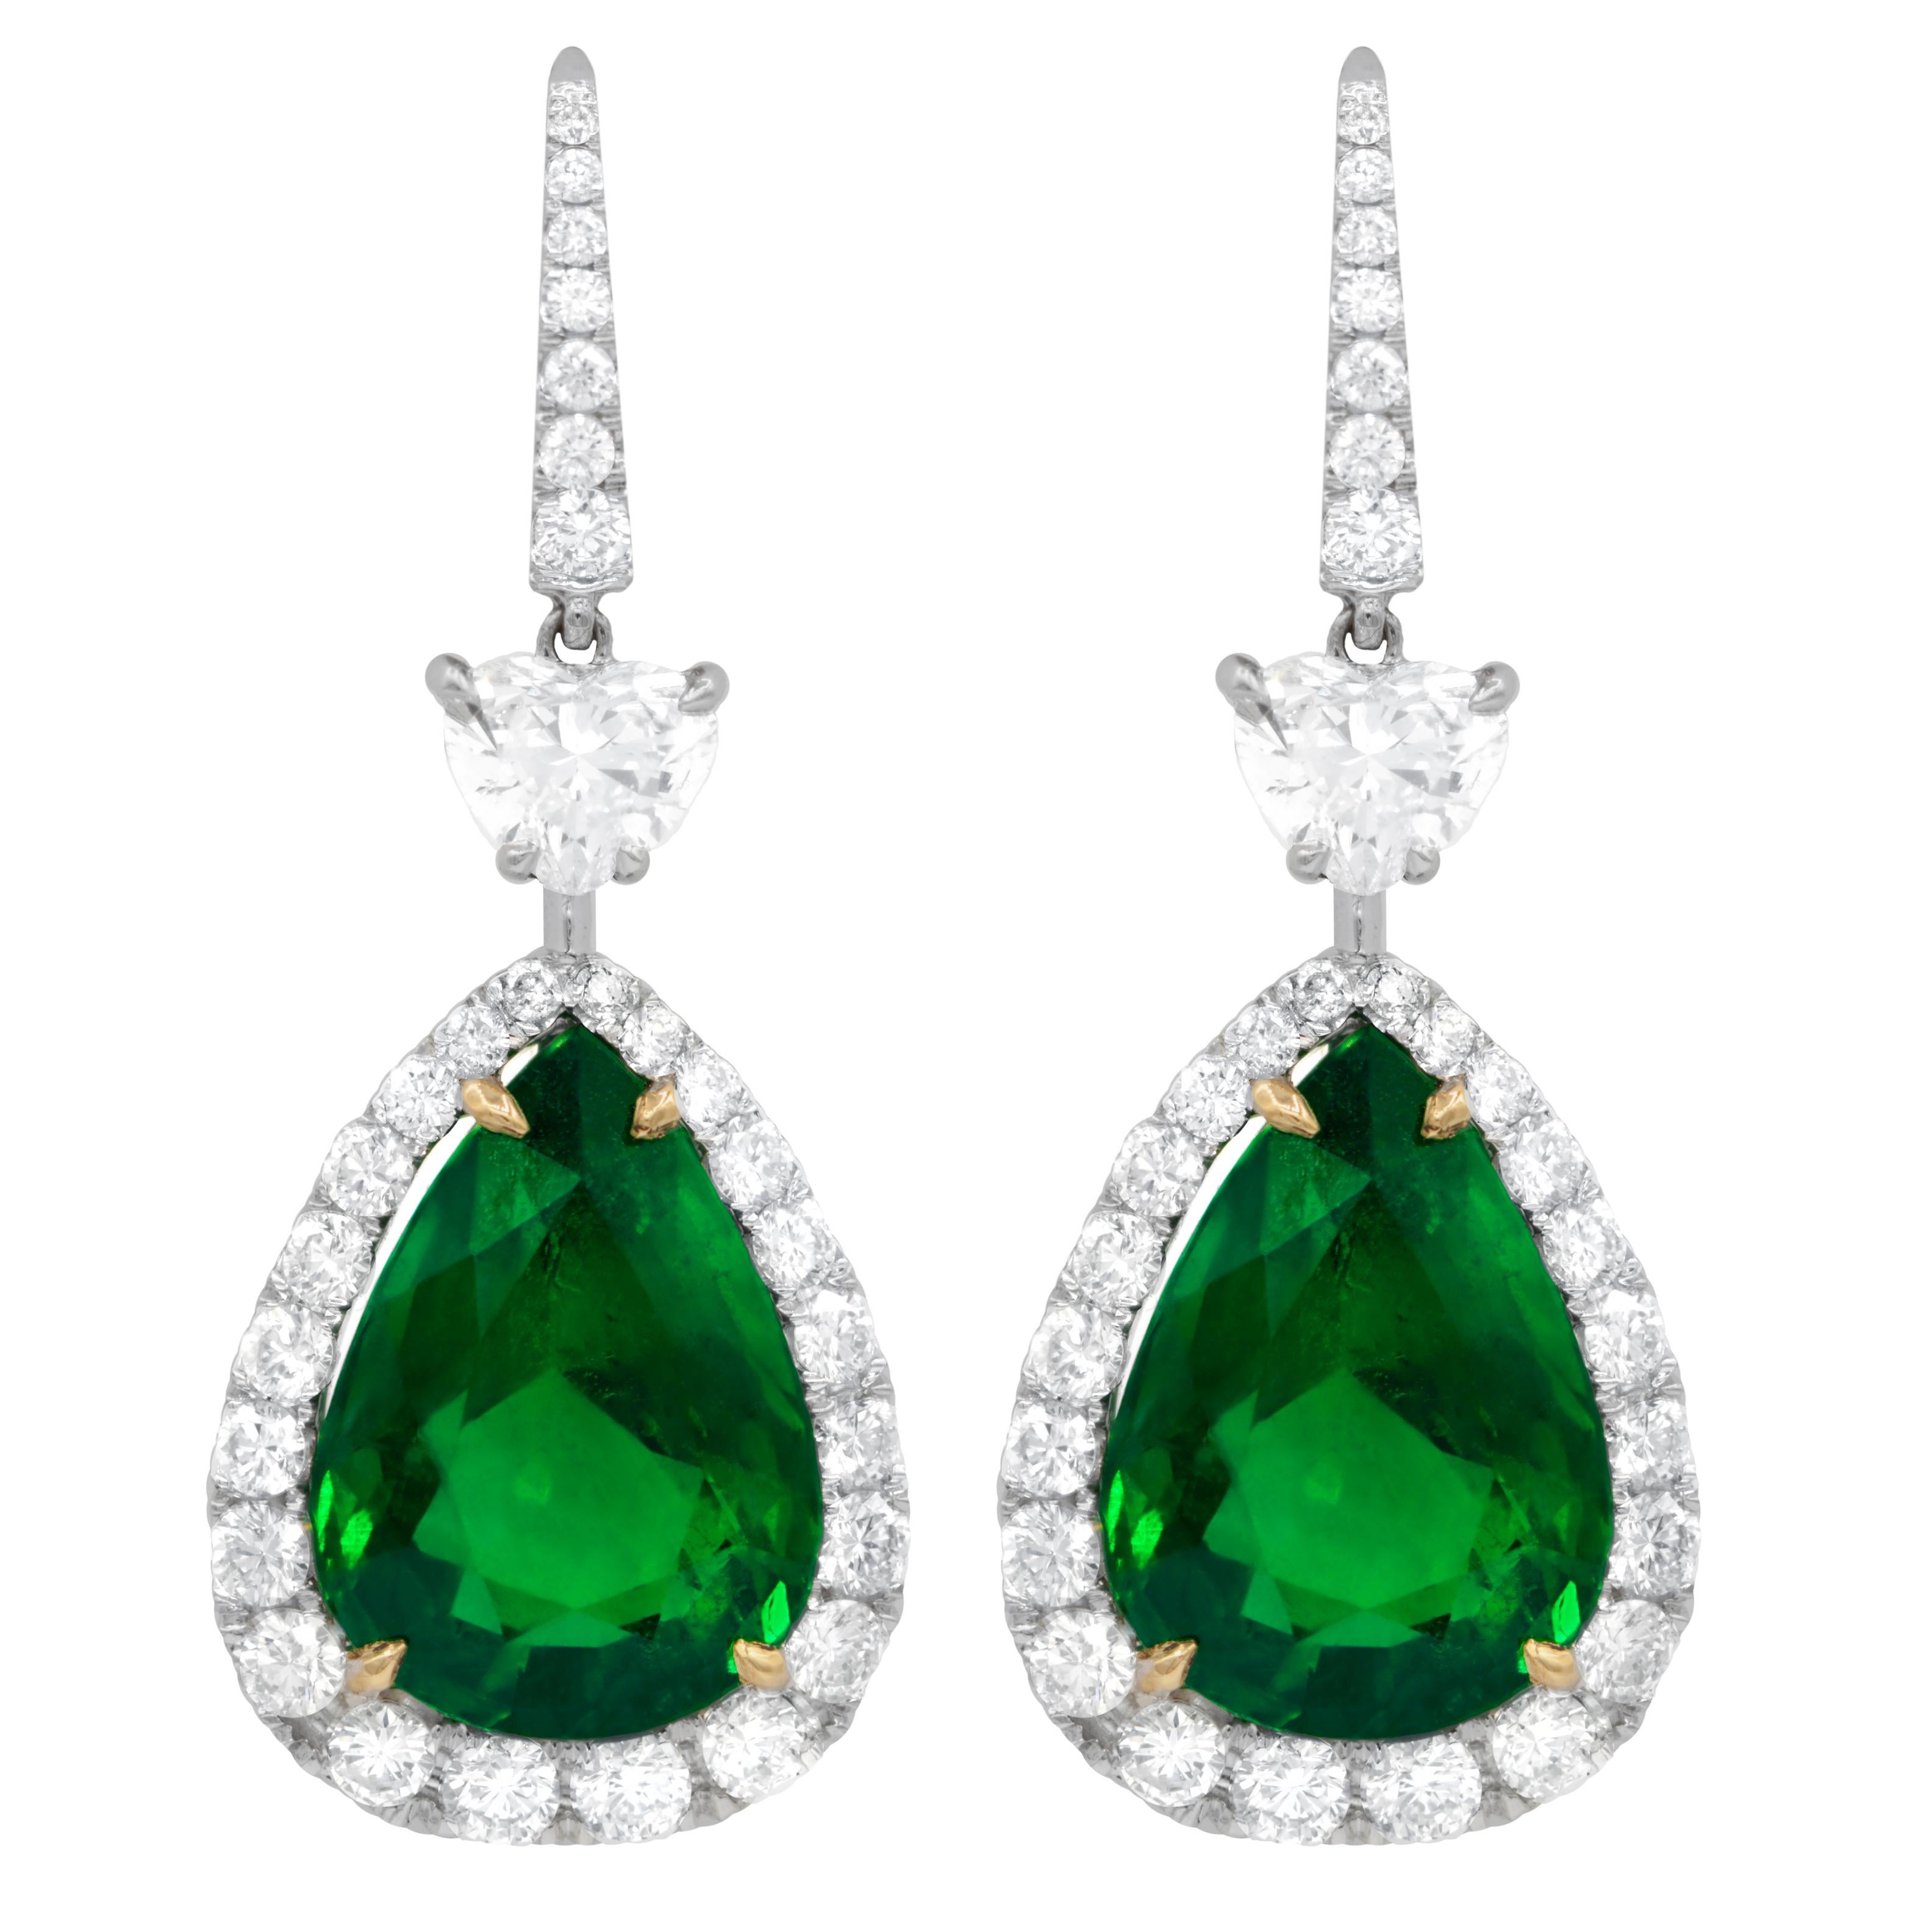 Pear Cut Diana M. 18kt White Gold Earrings with Pear Shape Emerald & White Diamonds